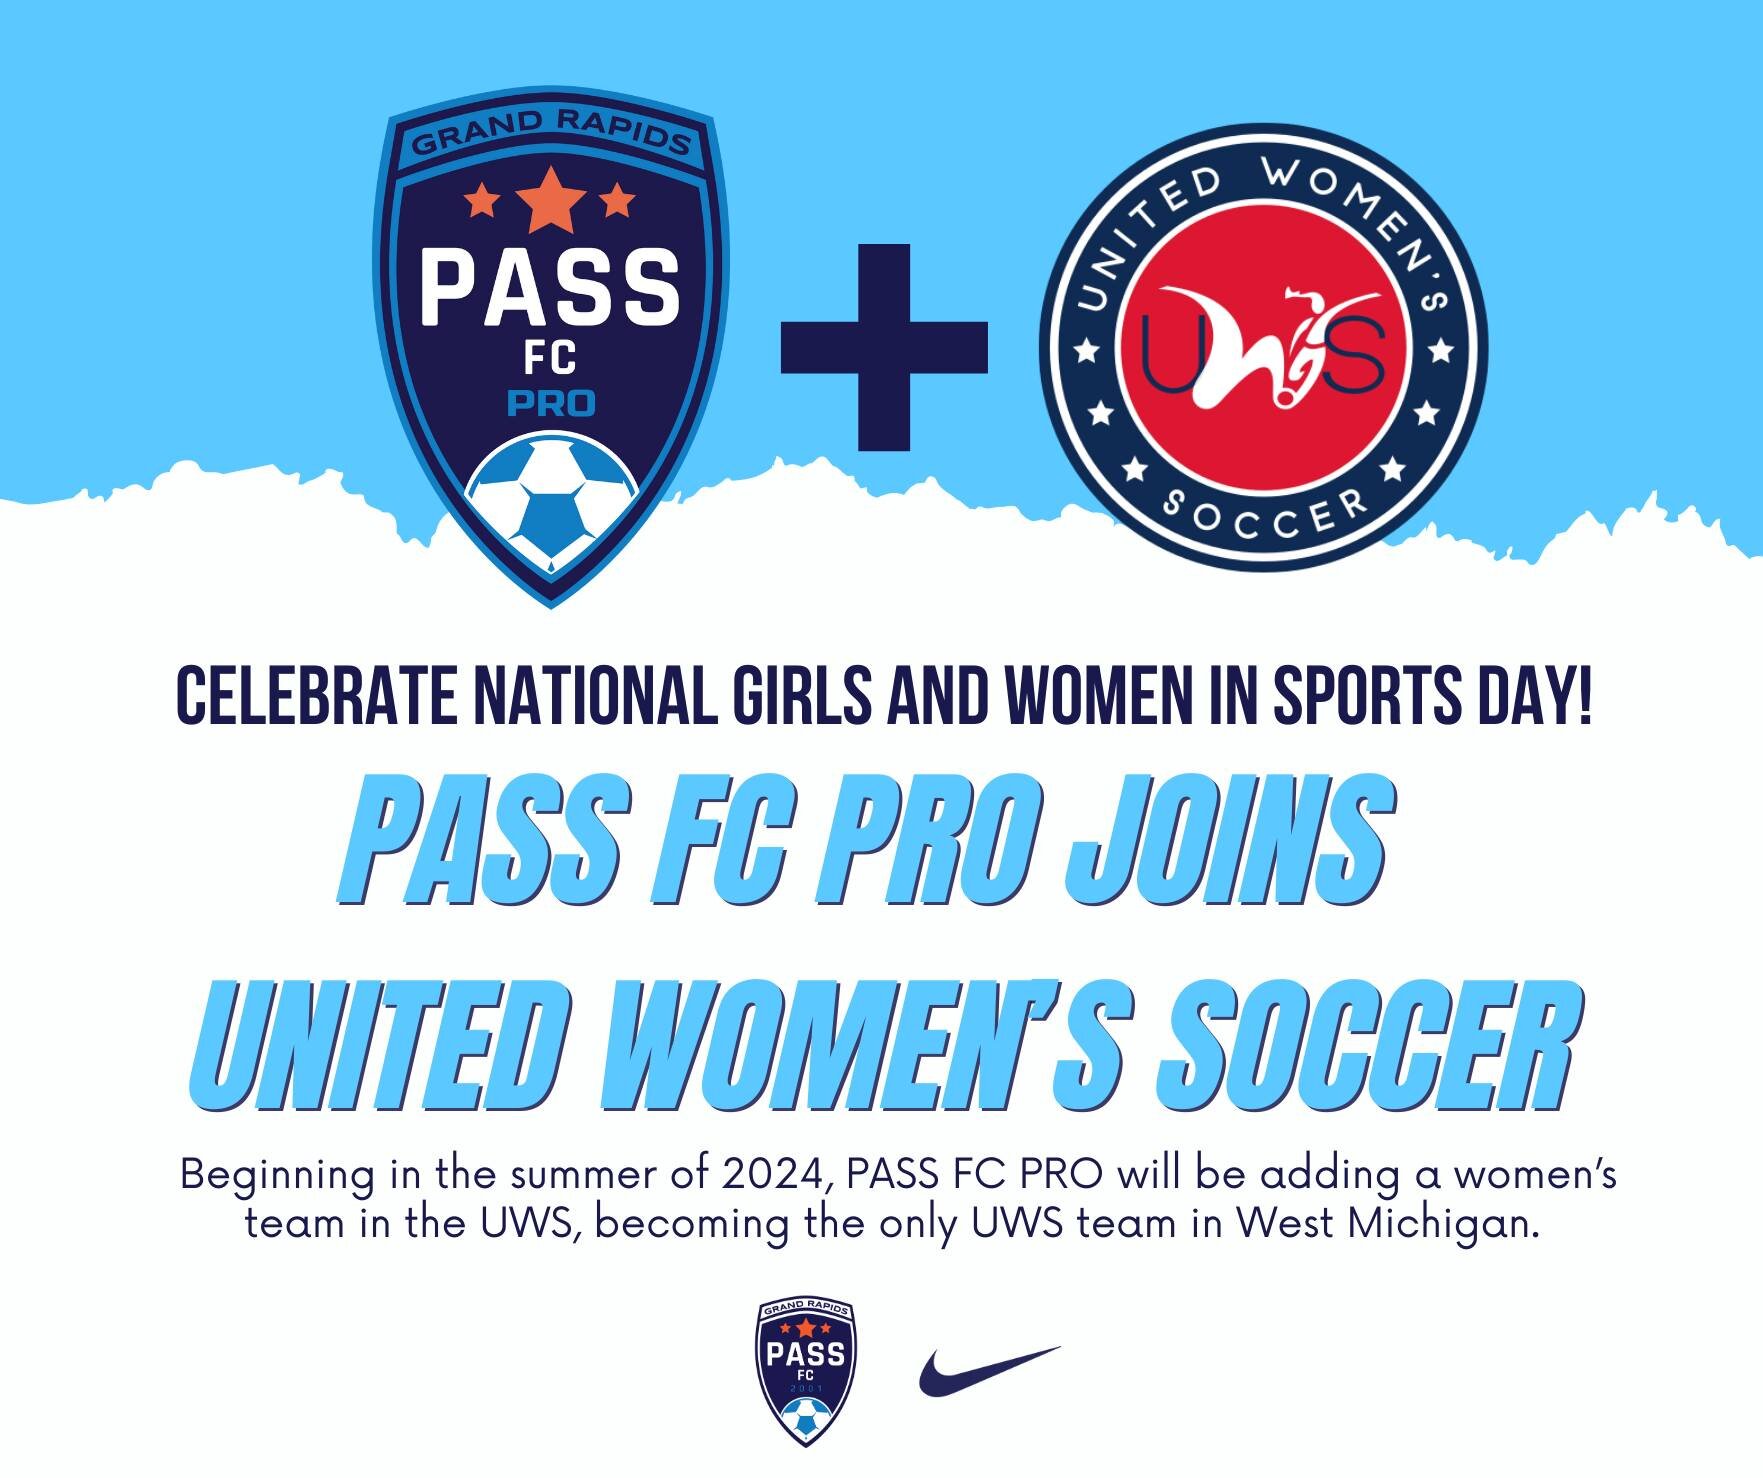 To celebrate National Girls and Women in Sports Day, we are proudly announcing the addition of a PASS FC Pro Women's team in the United Women's Soccer League. We are so happy to be providing a pathway for local female athletes to continue playing soc